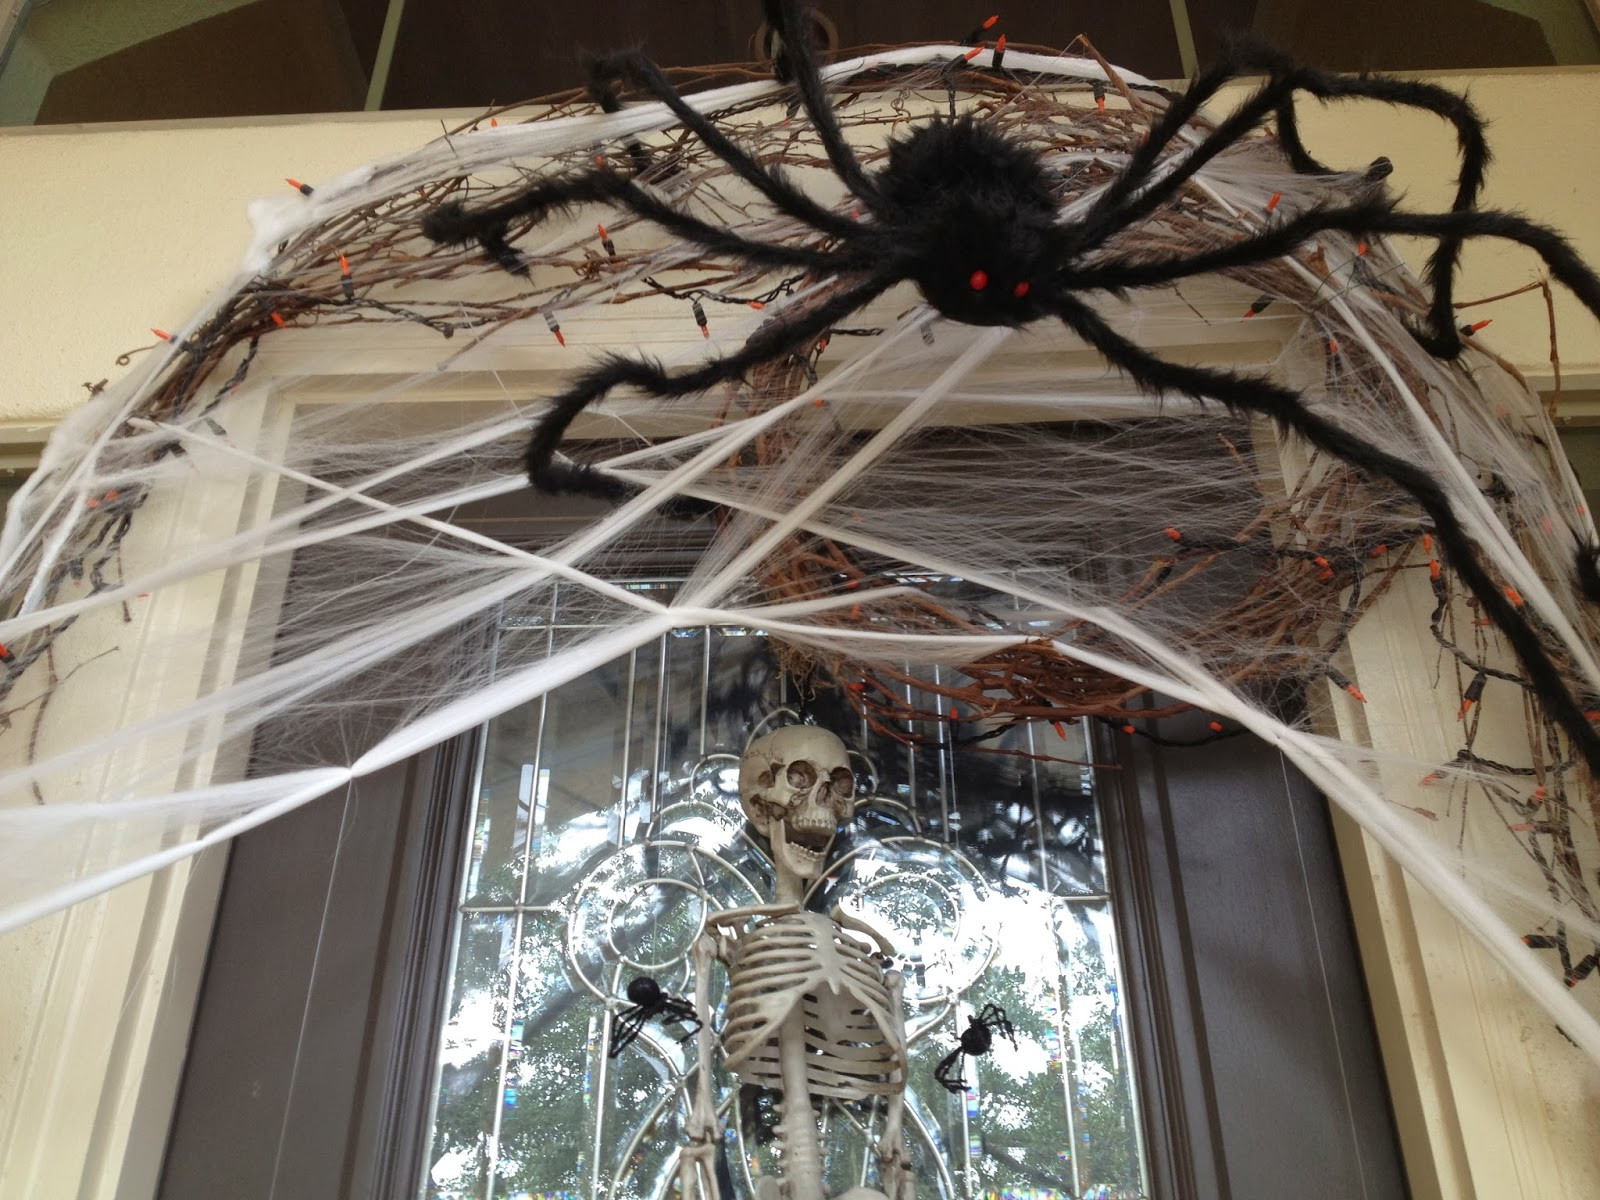 DIY Spider Web Decorations
 50 Awesome Halloween Decorations to Make This Year – The